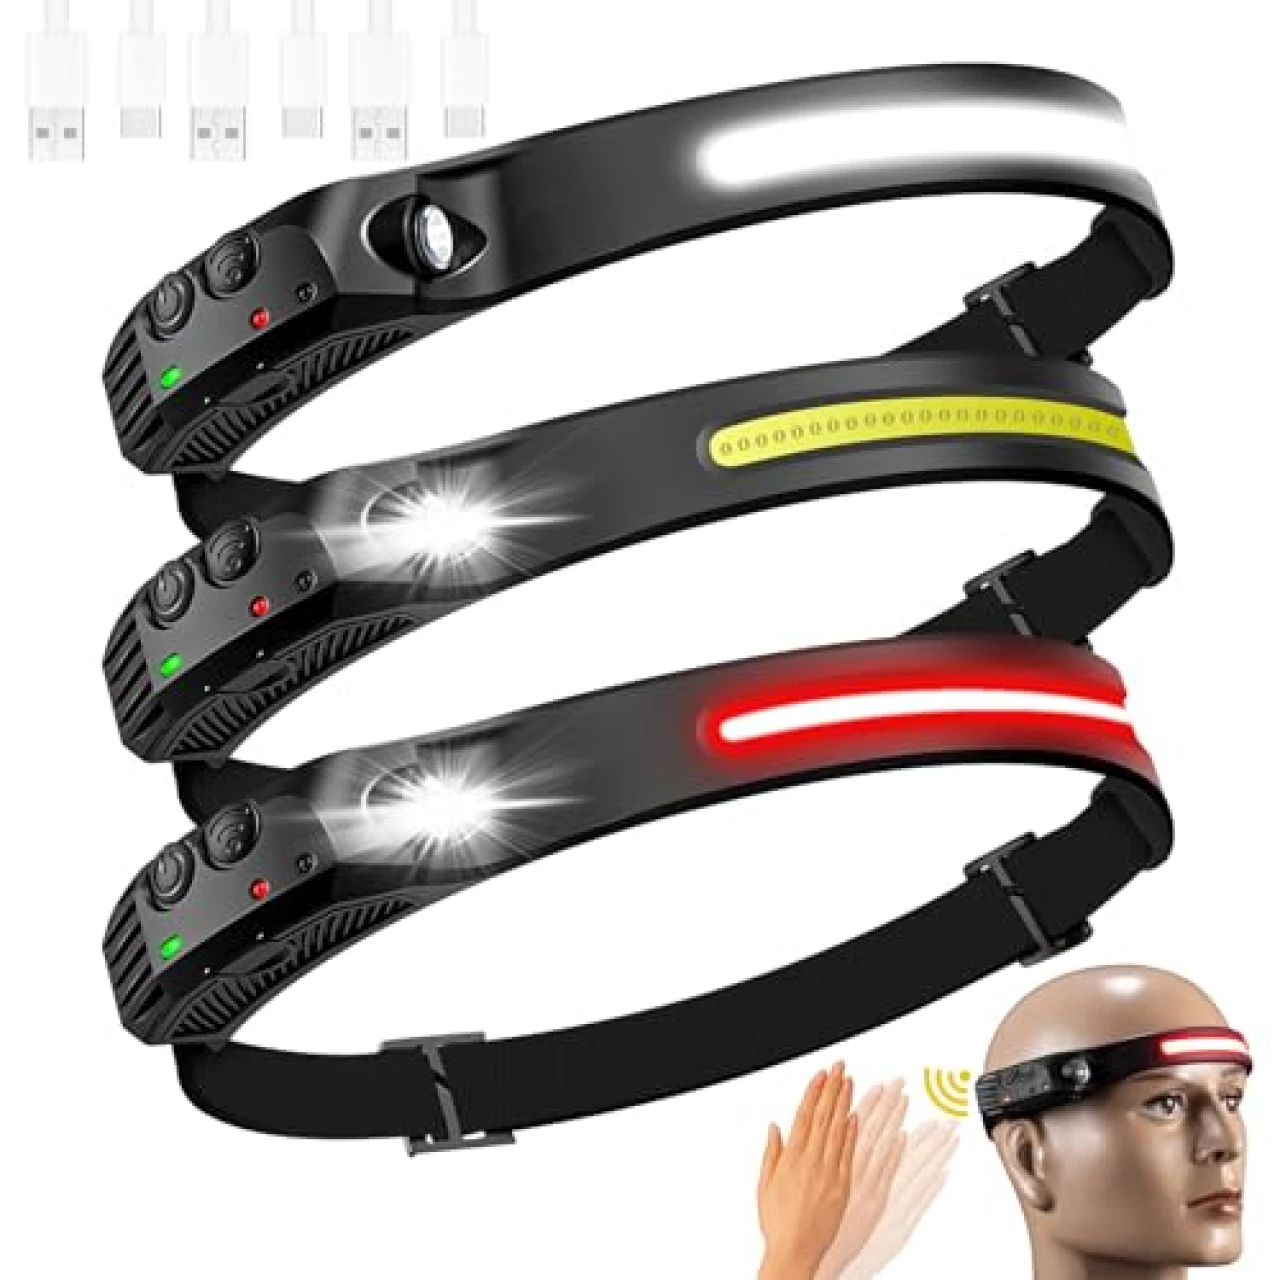 Rechargeable LED Headlamp,COB230°Wide Beam Headlamps with 3 lampbands,10 Modes of Lightweight Headlamps with Motion Sensors, Type-C USB Charging Headlamps,Suitable for Night Running, Cycling